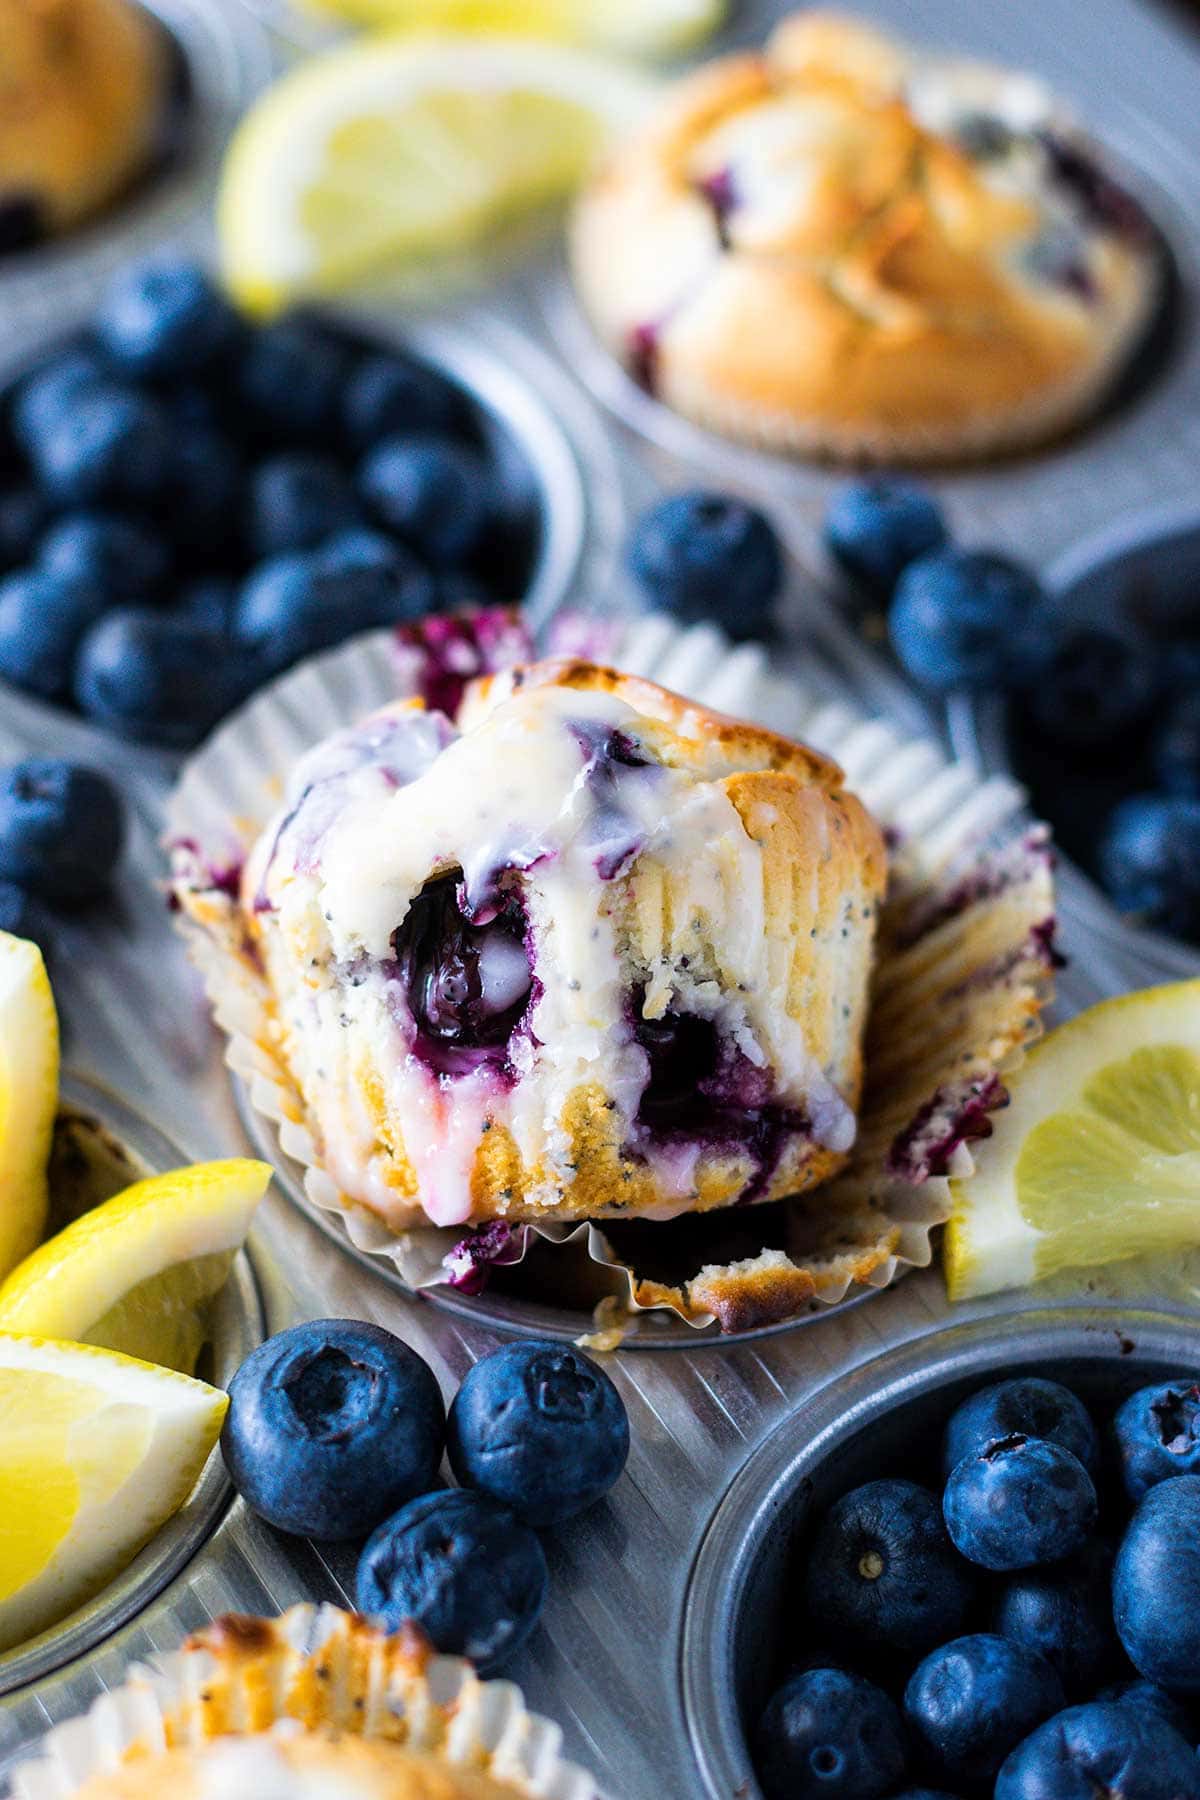 Blueberry lemon poppy seed muffin with lemon glaze drizzled on top in a muffin ray with scattered blueberries and lemon slices.